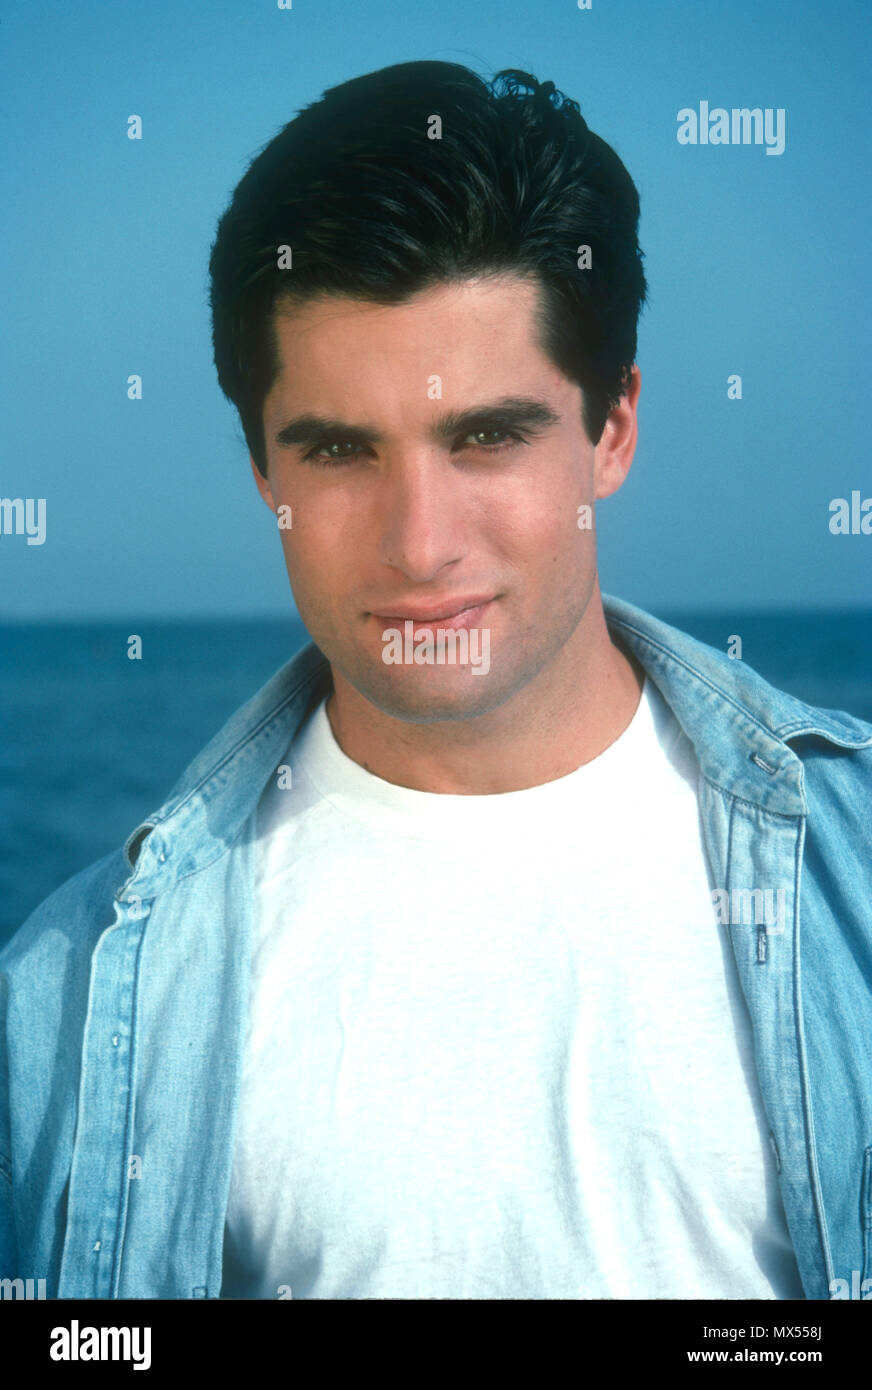 MALIBU, CA - JULY 24: (EXCLUSIVE) Actor John Haymes Newton poses during a photo shoot on July 24, 1991 in Malibu, California. Photo by Barry King/Alamy Stock Photo Stock Photo